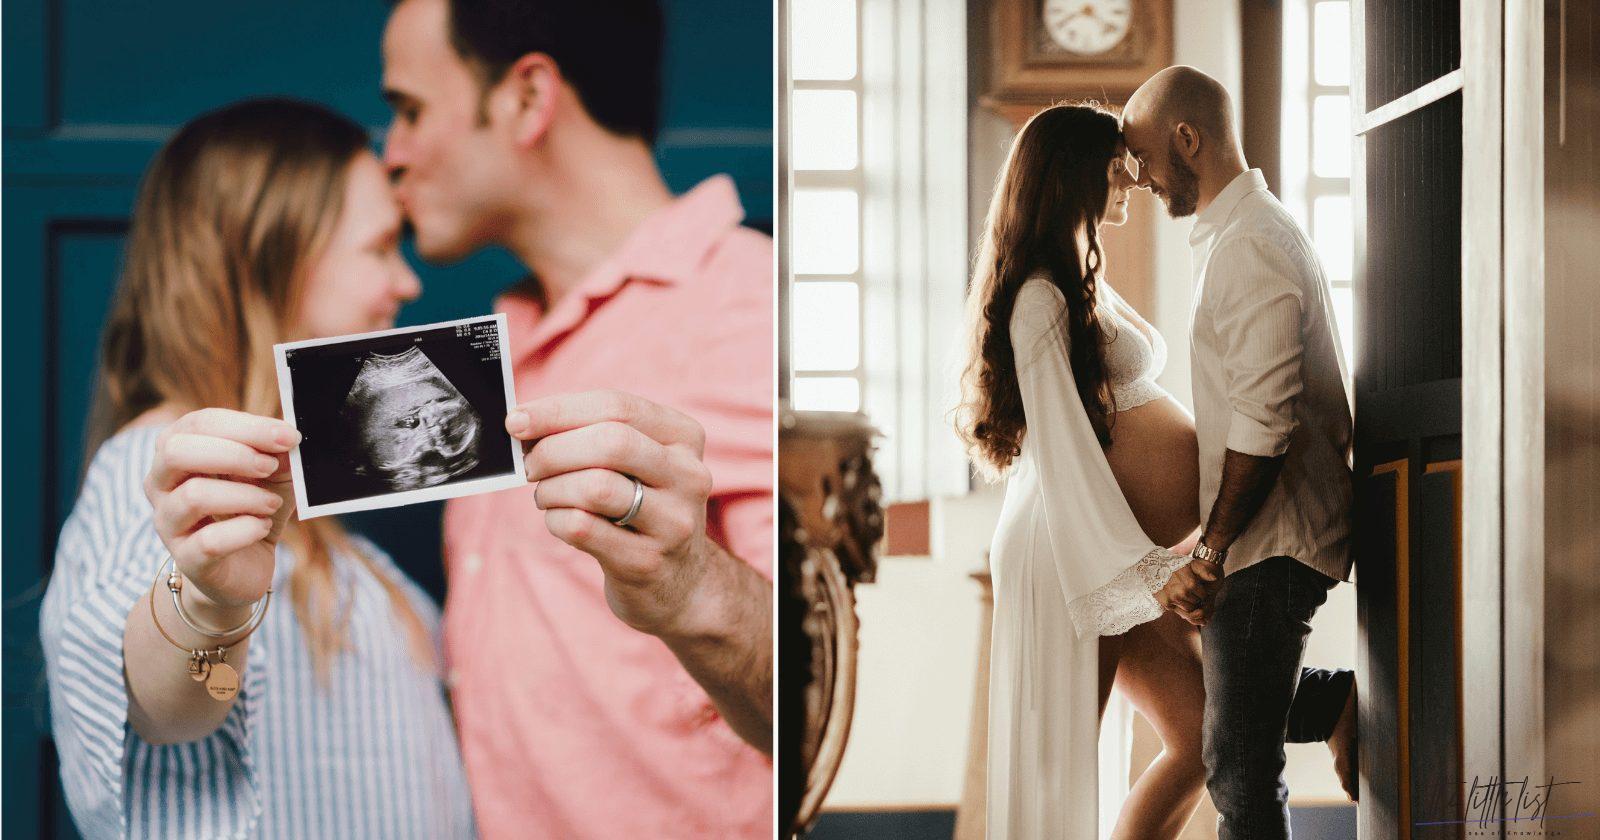 95 captions for pregnant photo with father that are too CUTE